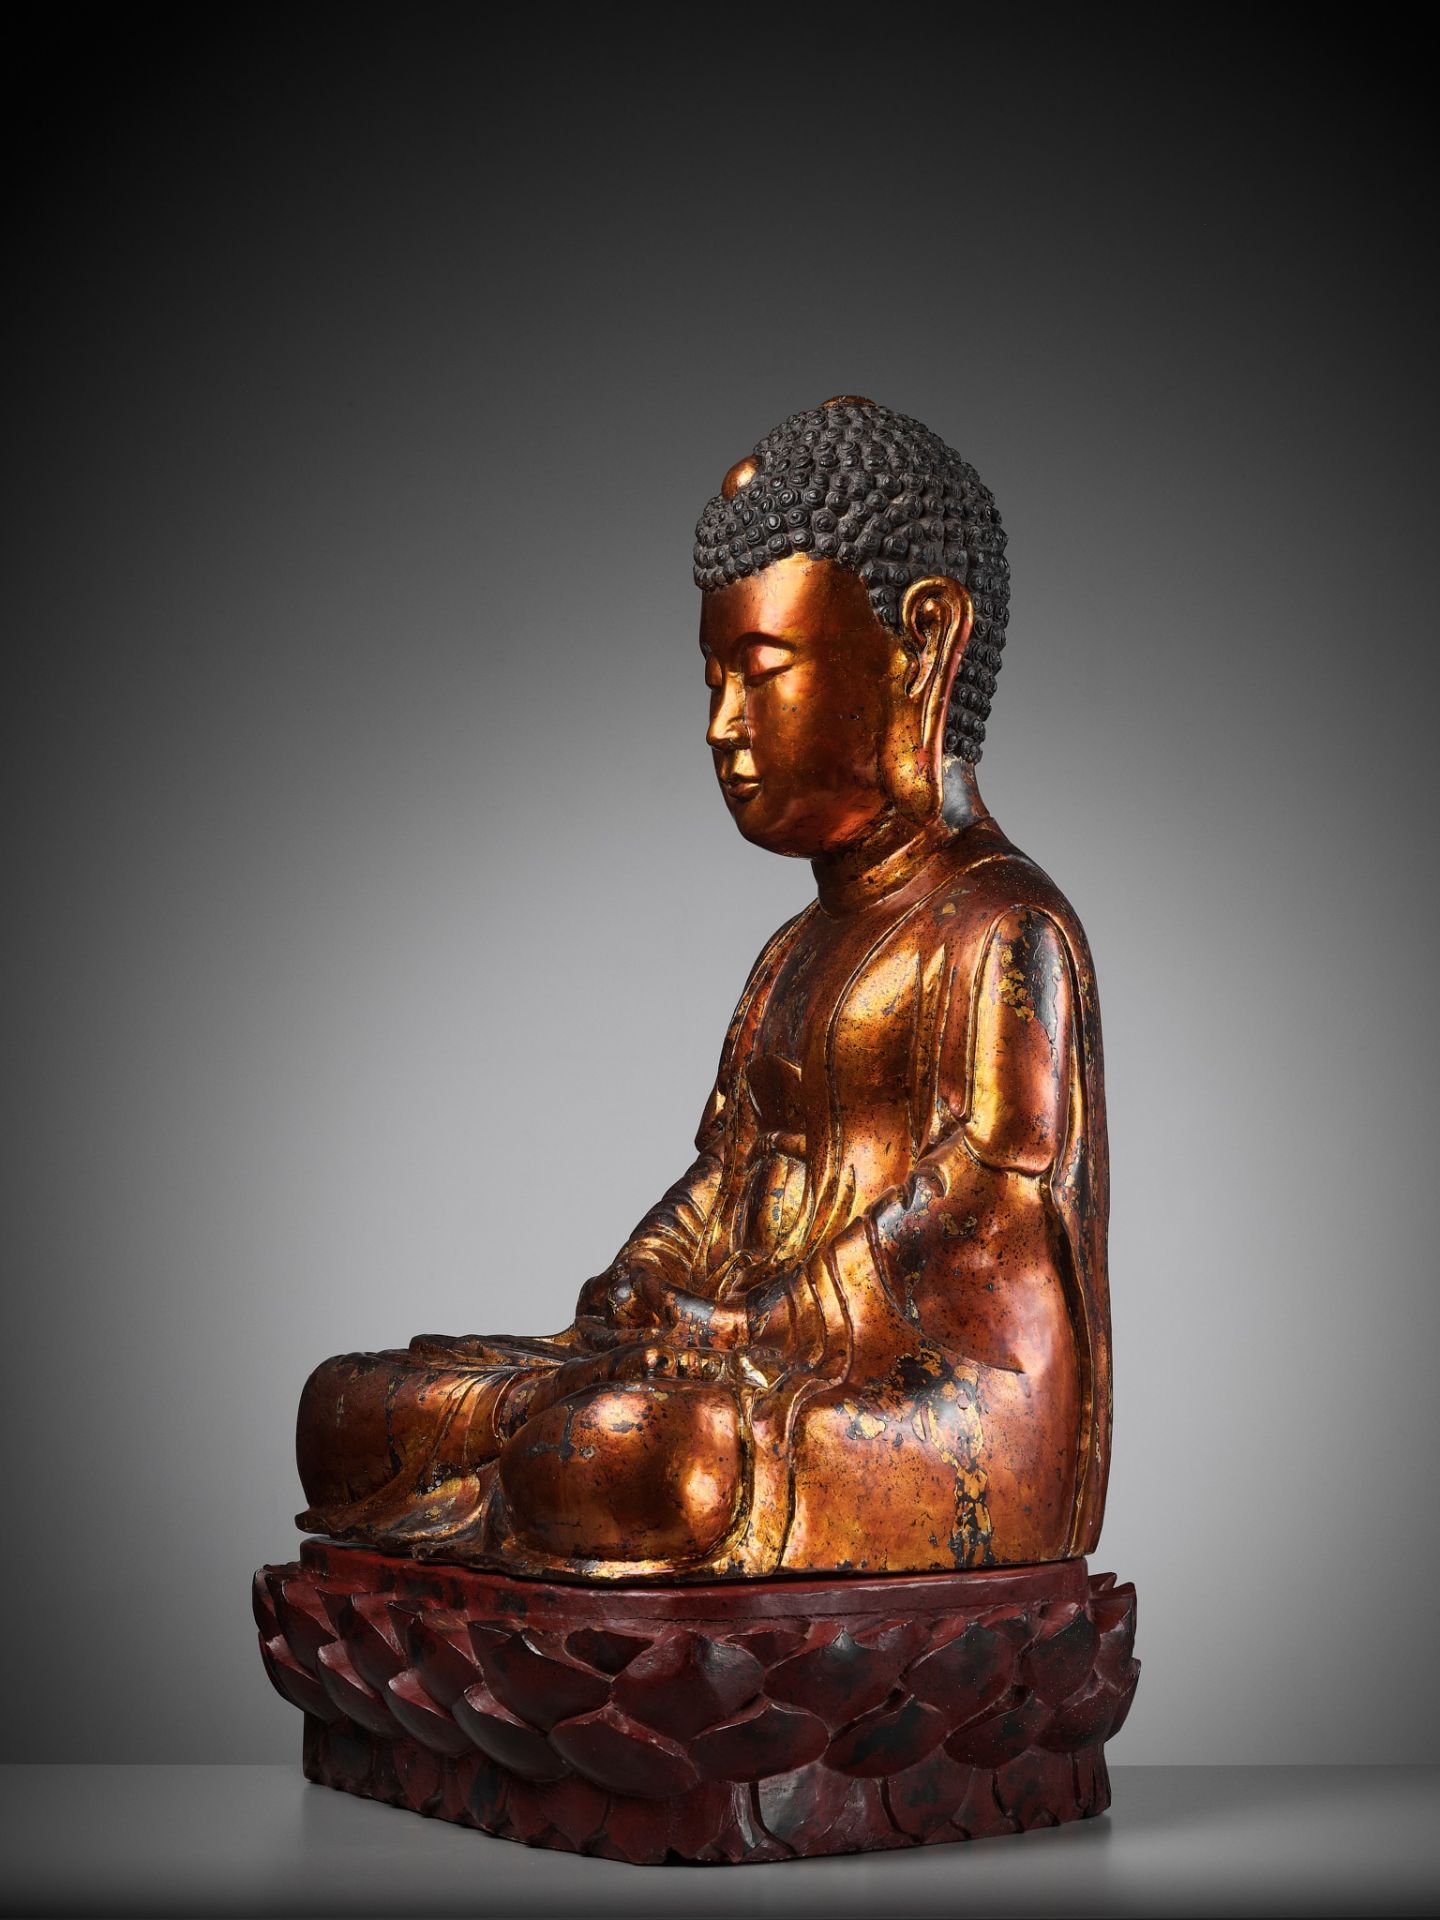 AN EXTRAORDINARY LARGE GILT-LACQUER WOOD STATUE OF BUDDHA, VIETNAM, 17TH-18TH CENTURY - Image 9 of 11